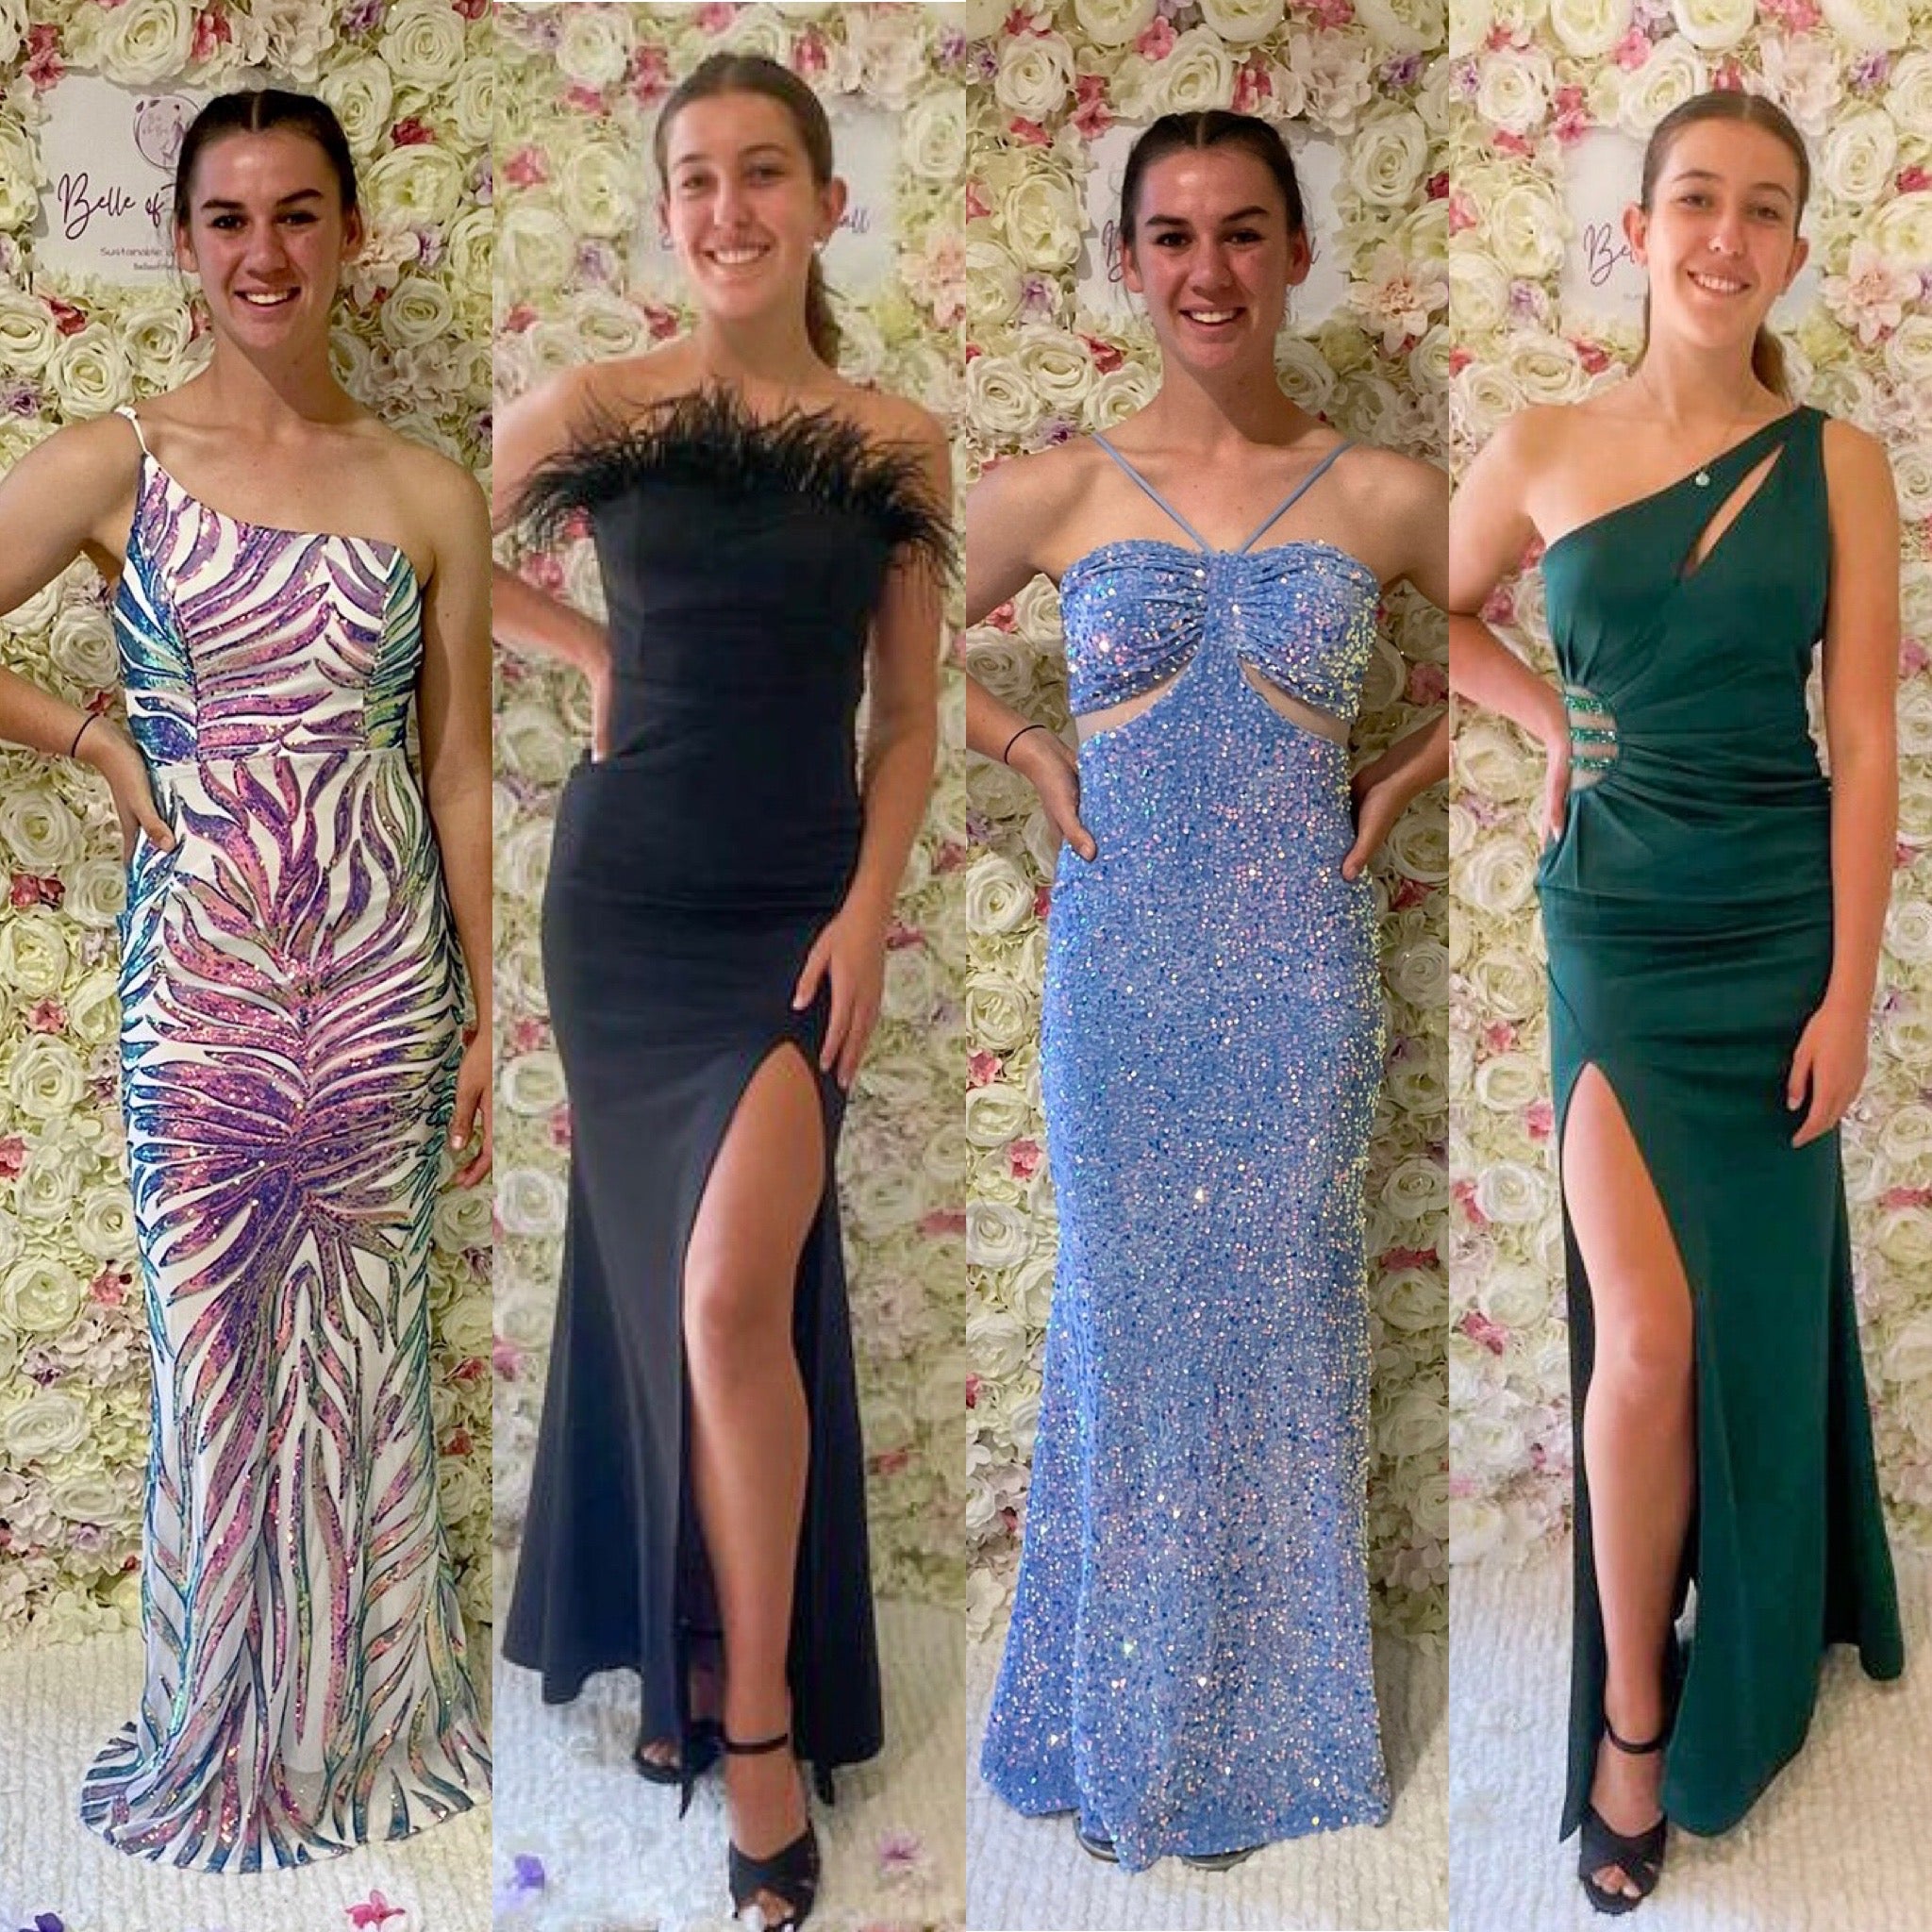 Top five Prom dress trends – Eagle's Eye